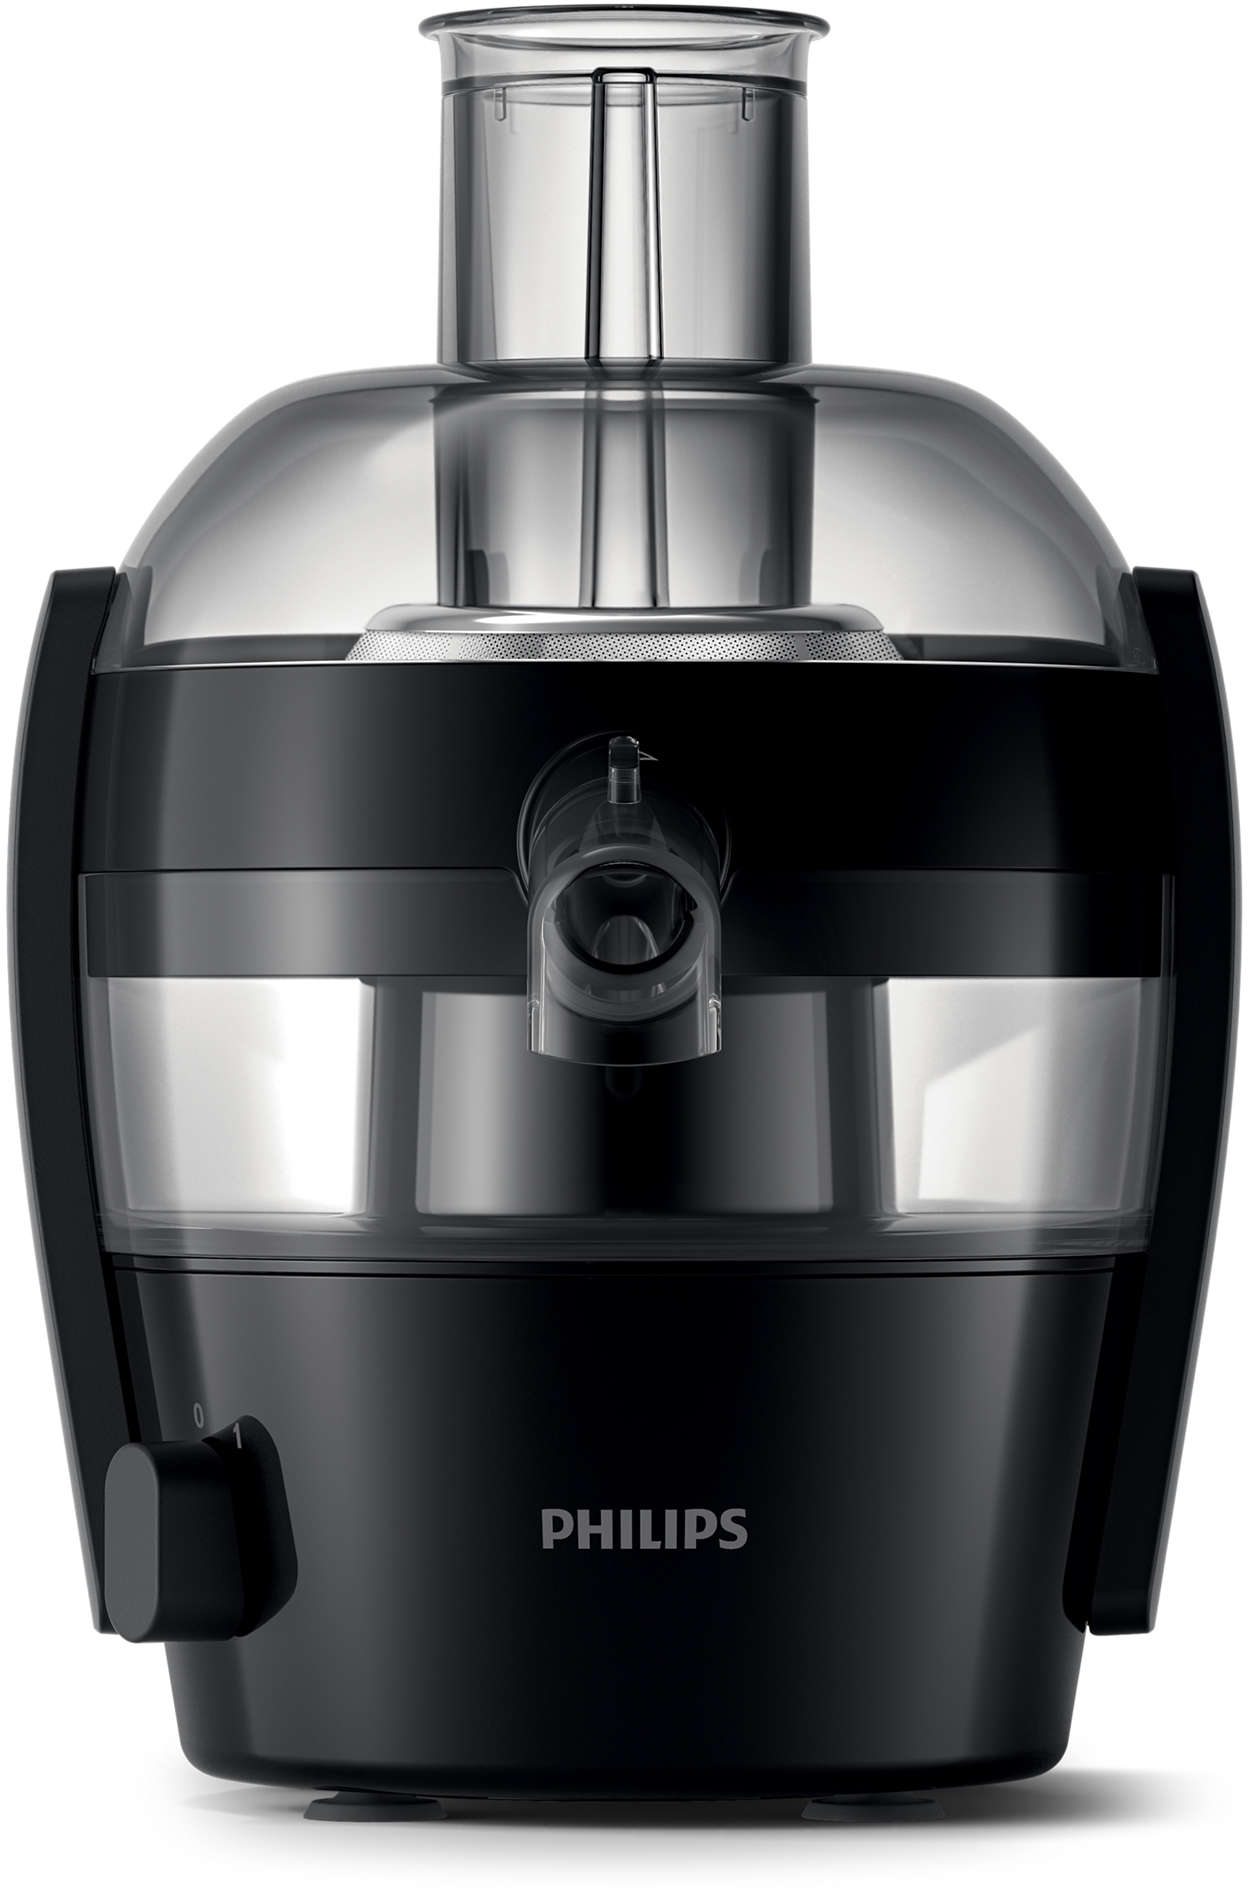 Philips Viva Collection Juicer 